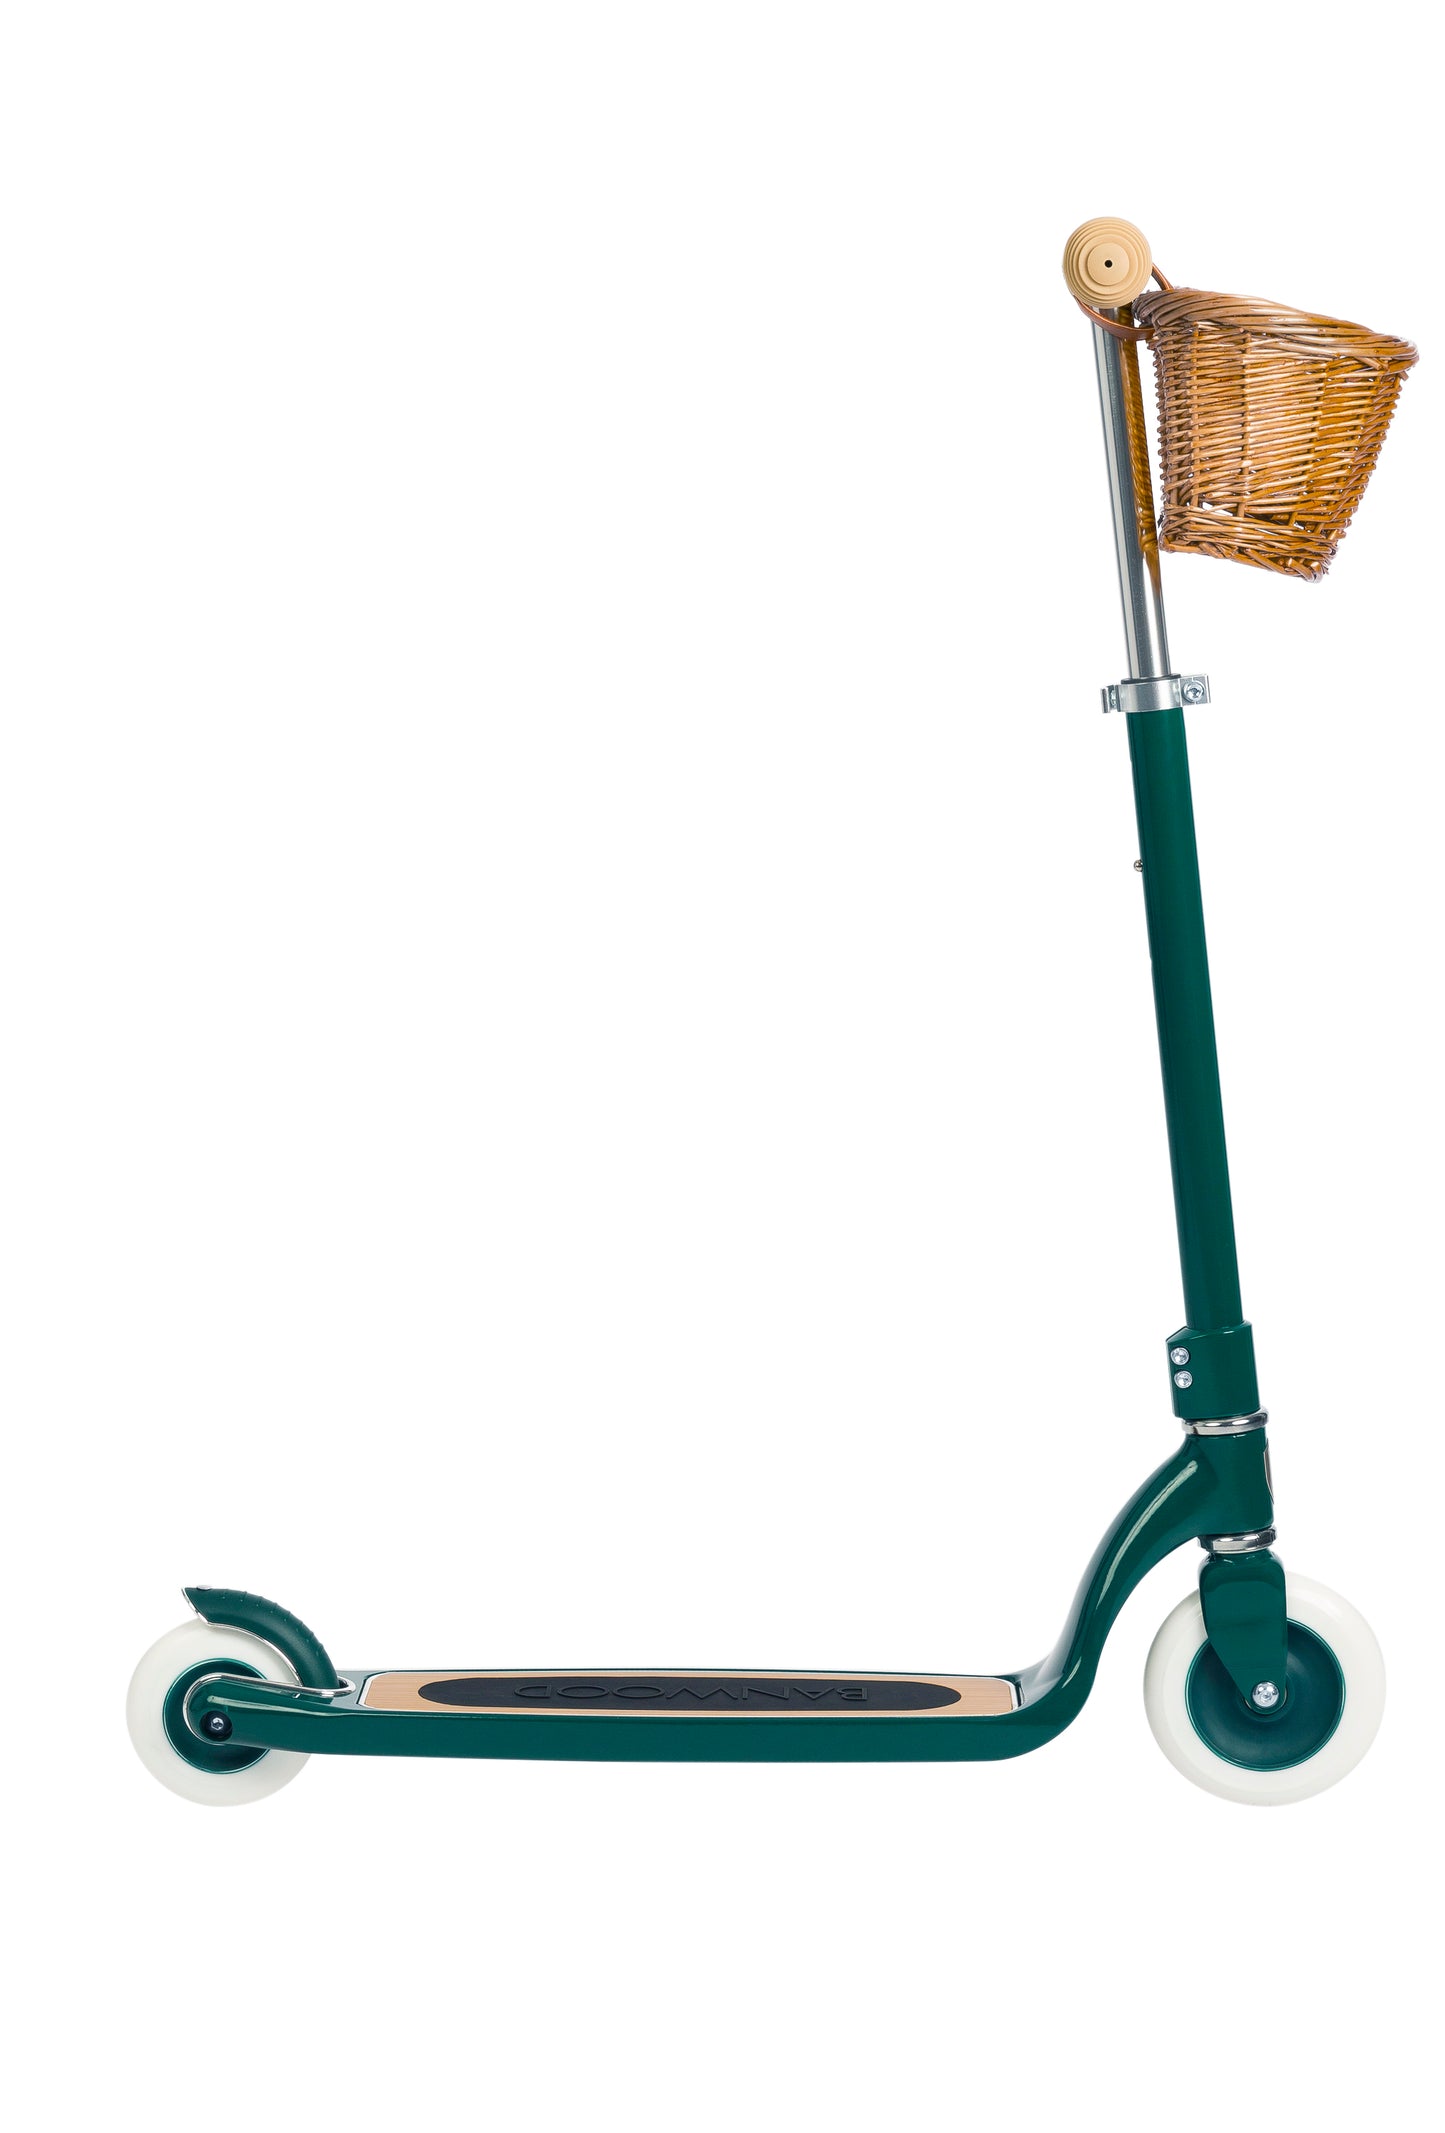 Maxi Scooter - Green - pre-order / back in stock End of February